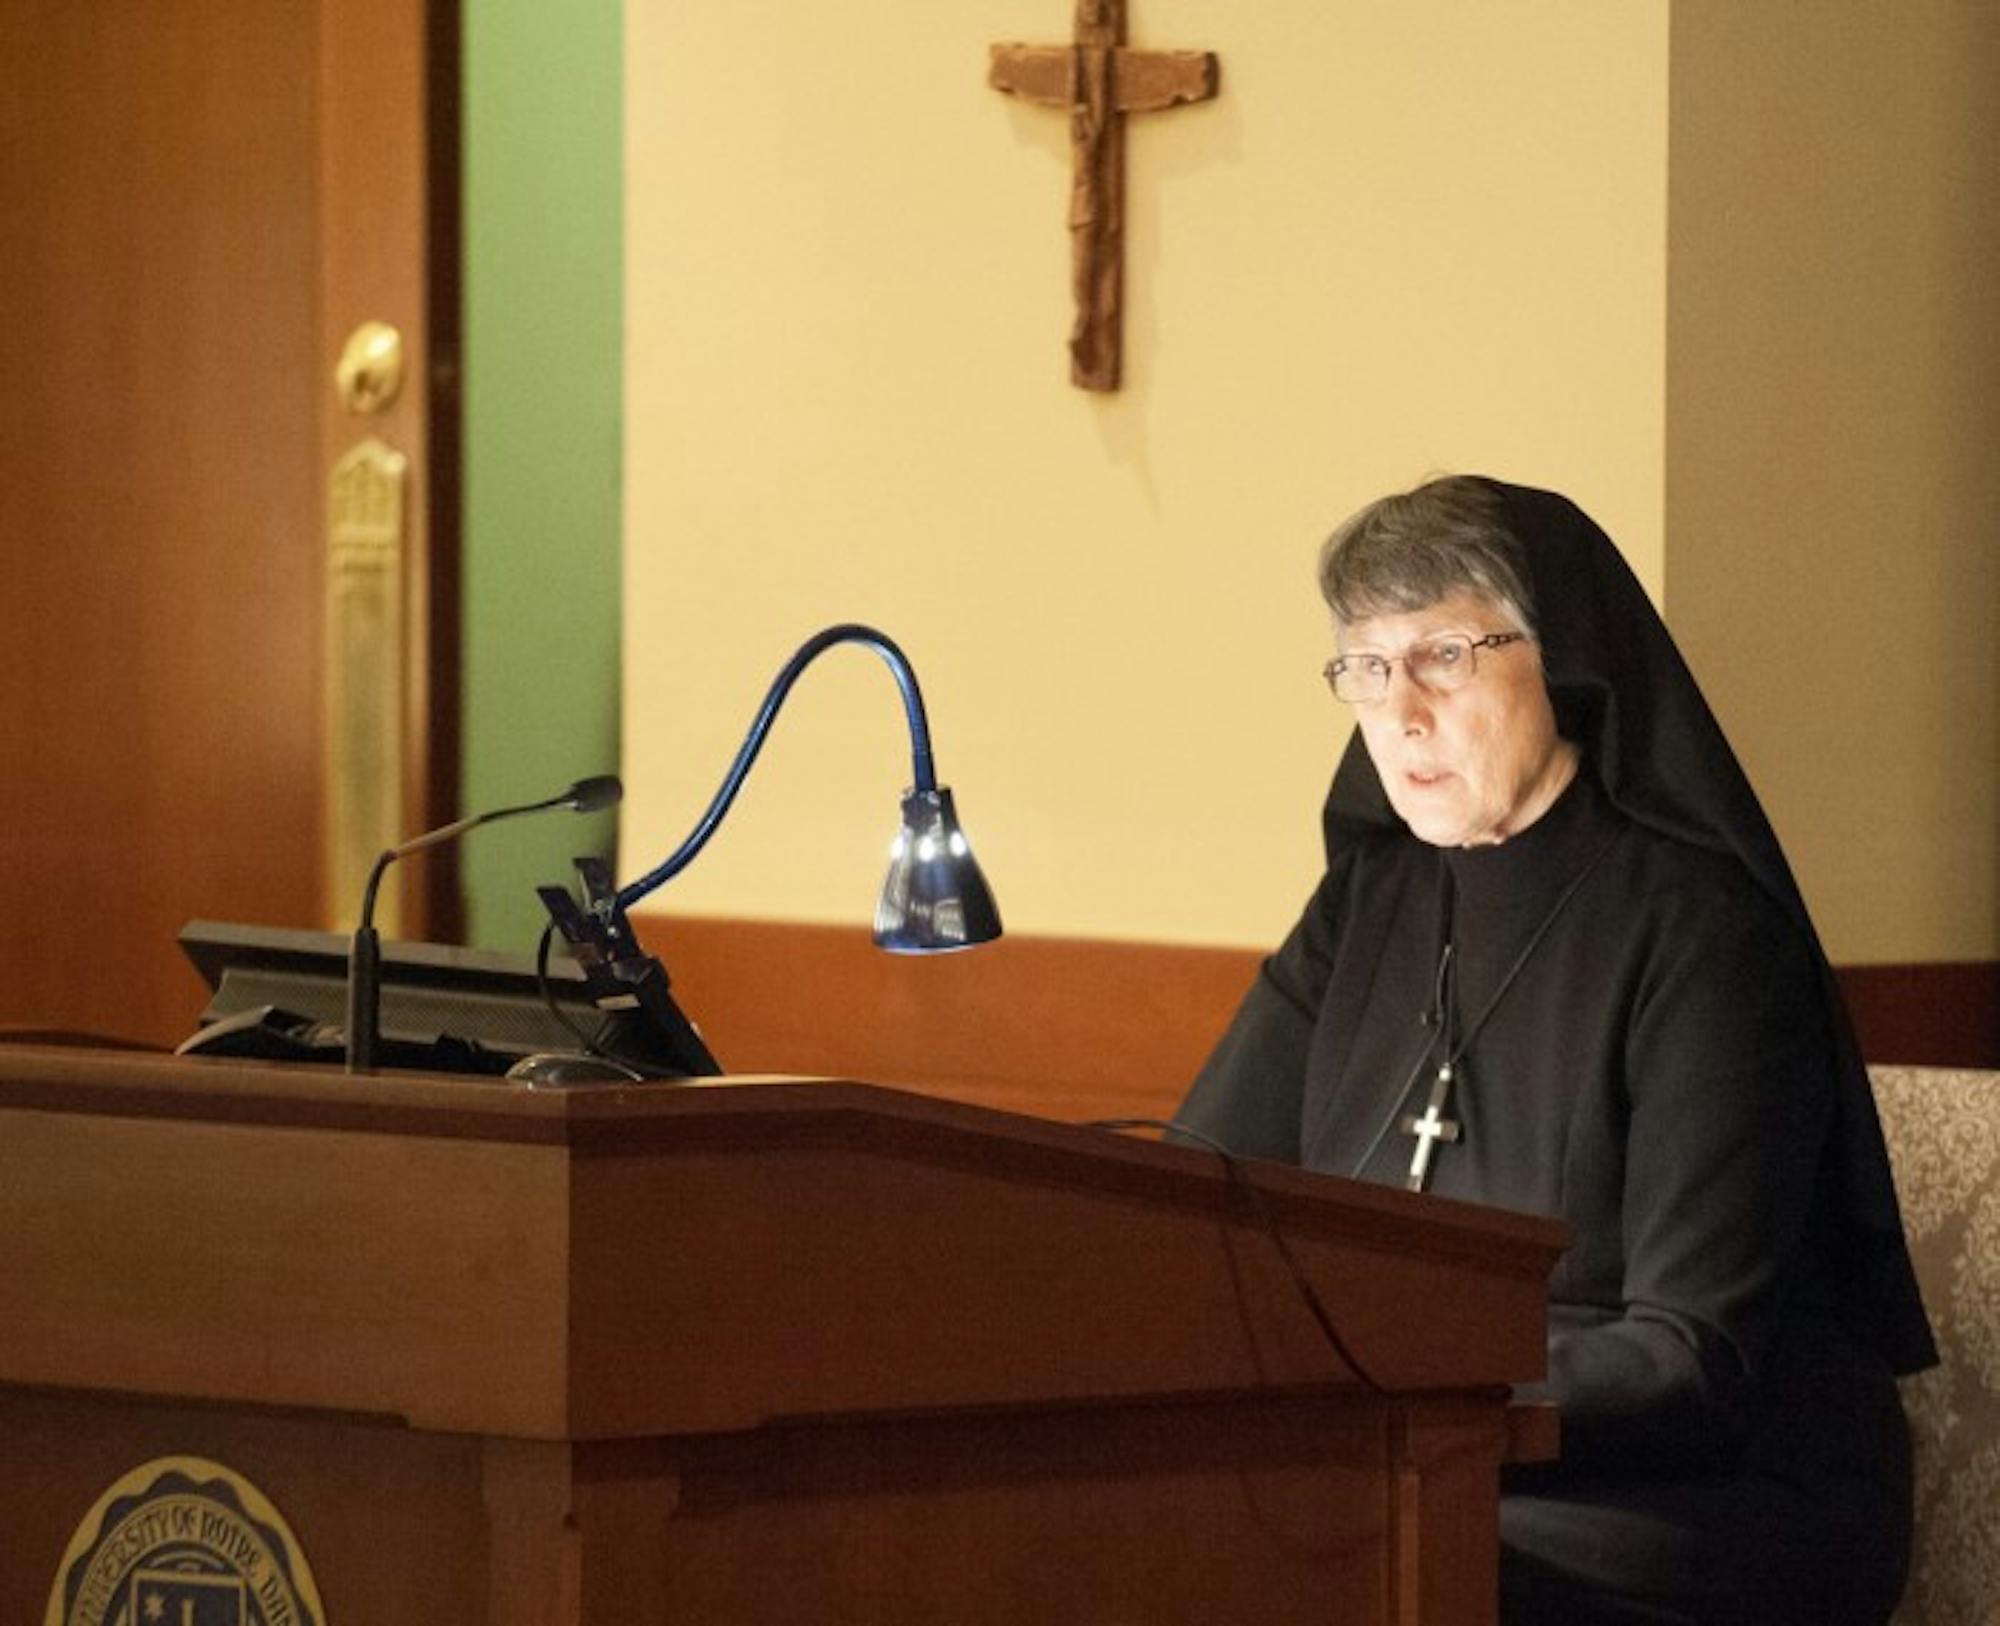 Sr. Mary Prudence Allen delivers the 6th Annual Human Dignity Lecture on Tuesday. Allen traced the philosophy of gender throughout the ages.